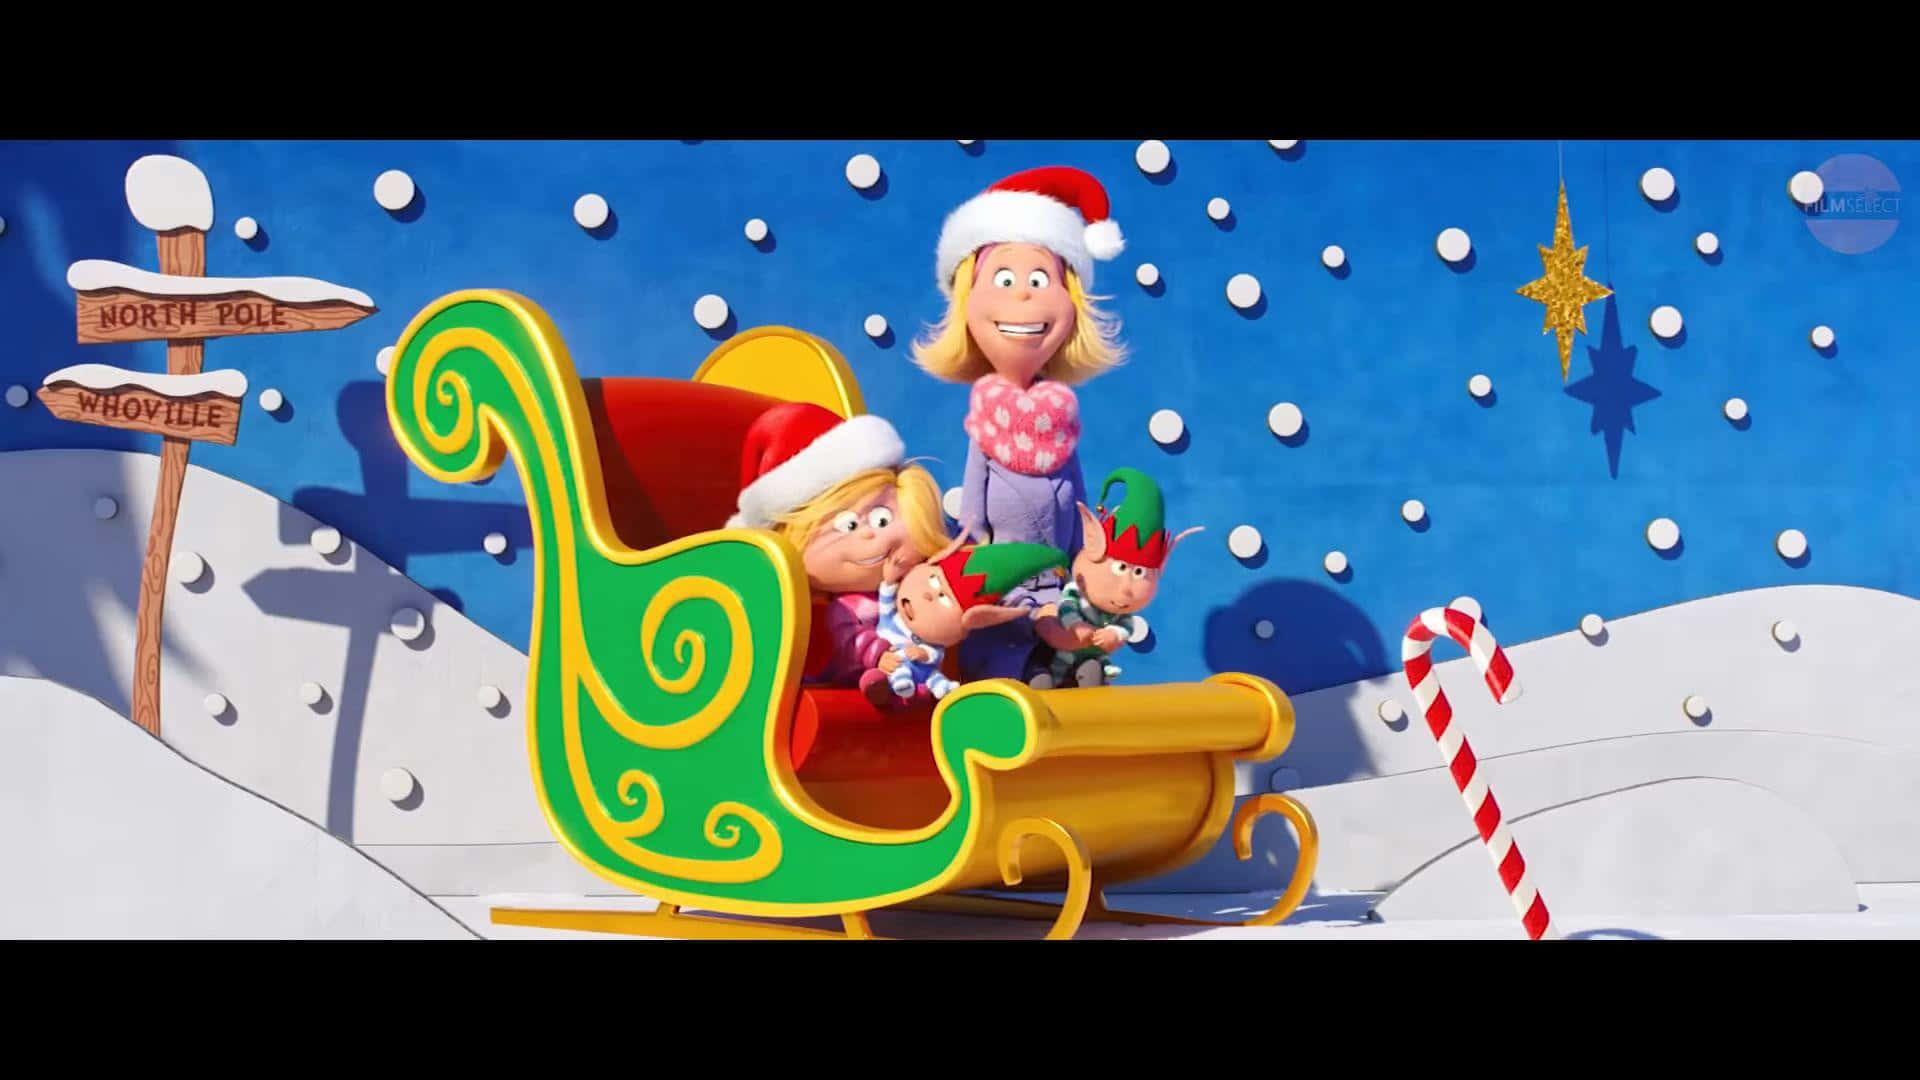 A Sleigh With Two Children In It Wallpaper